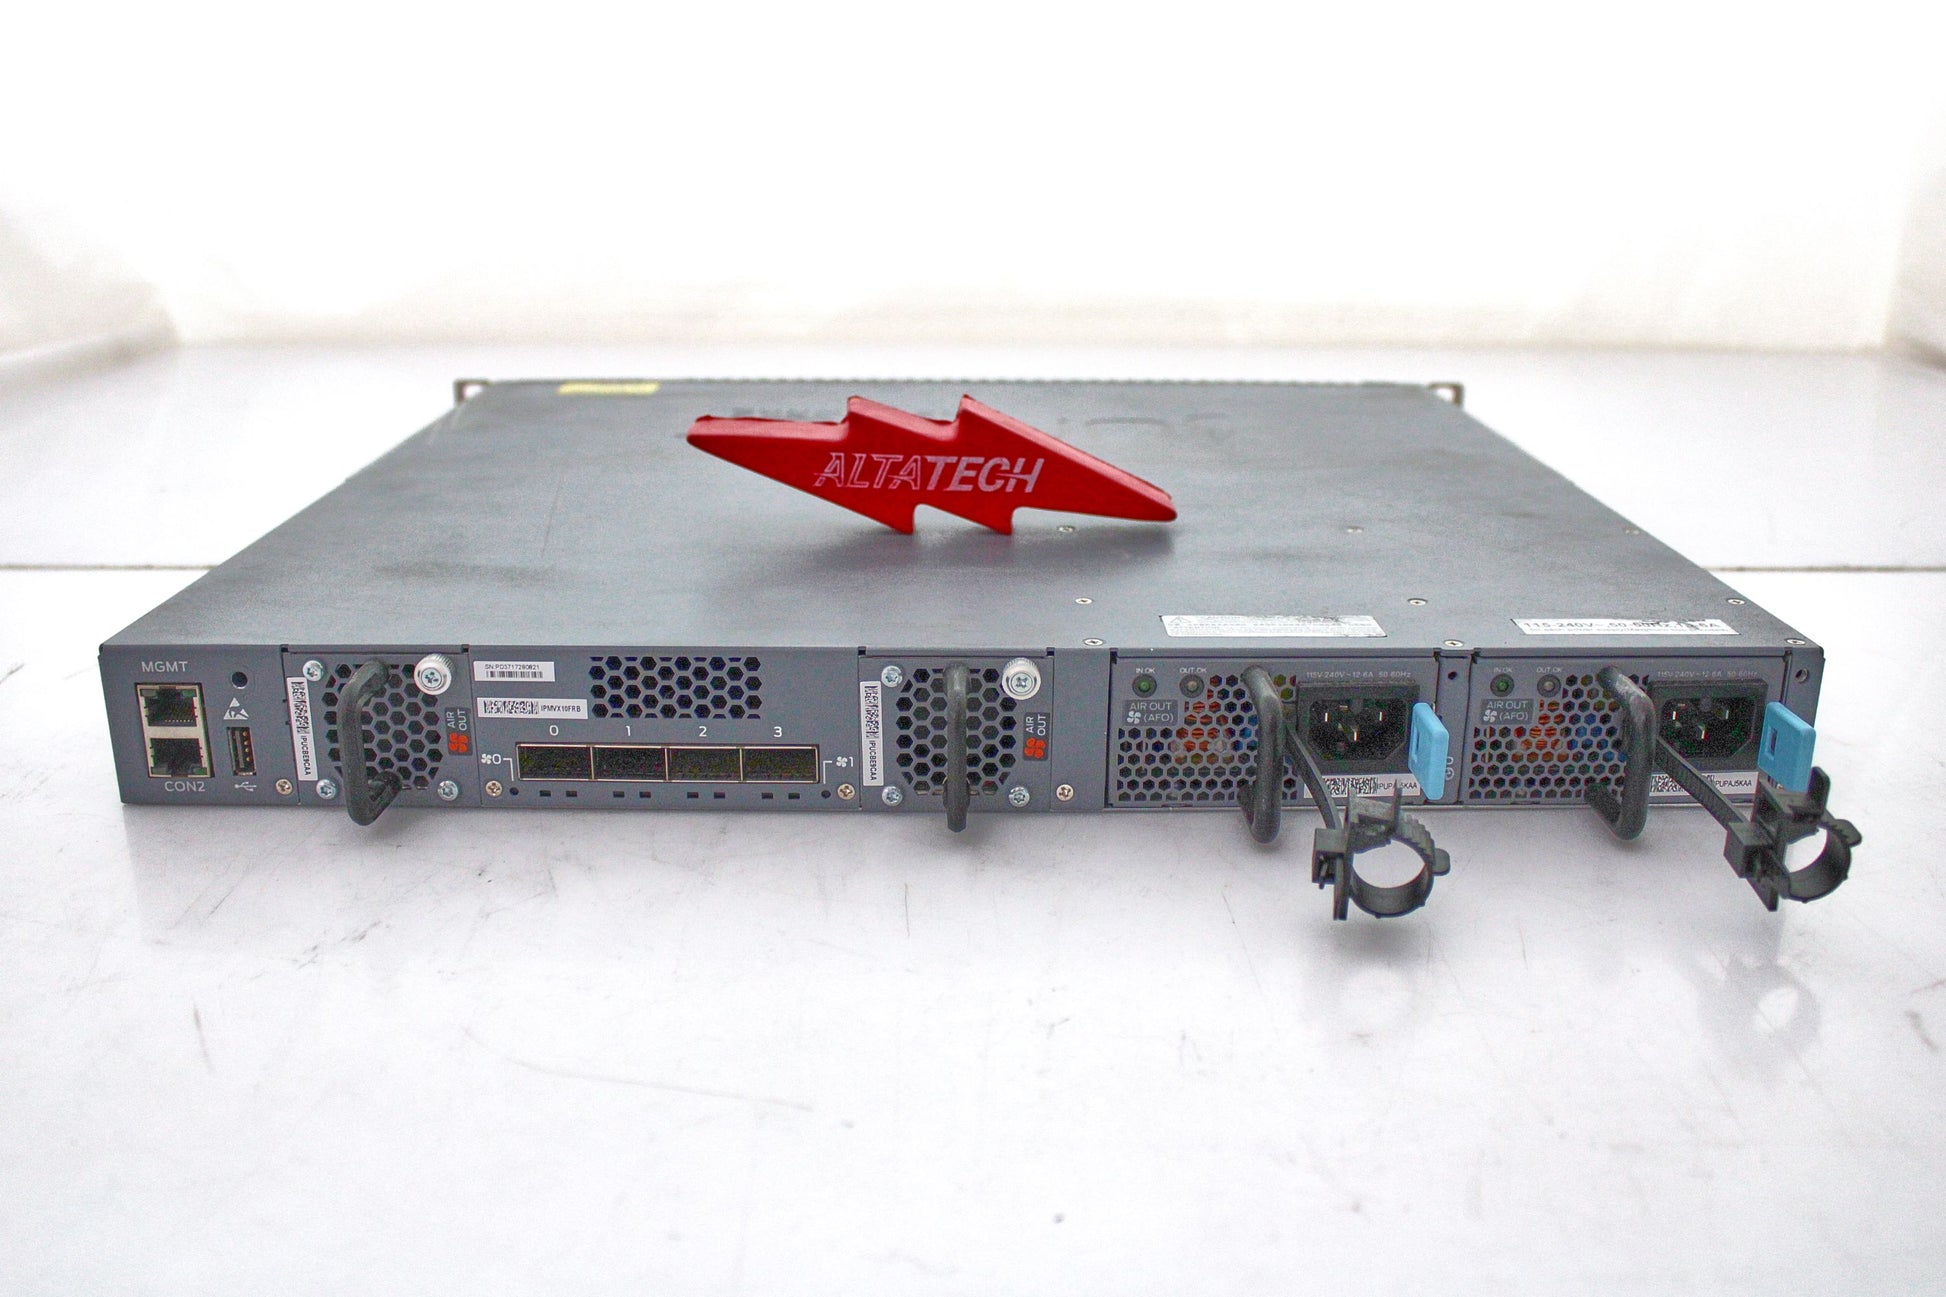 Juniper Networks EX4300-48P 48-PORT GBASET POE-PLUS SWITCH, Used